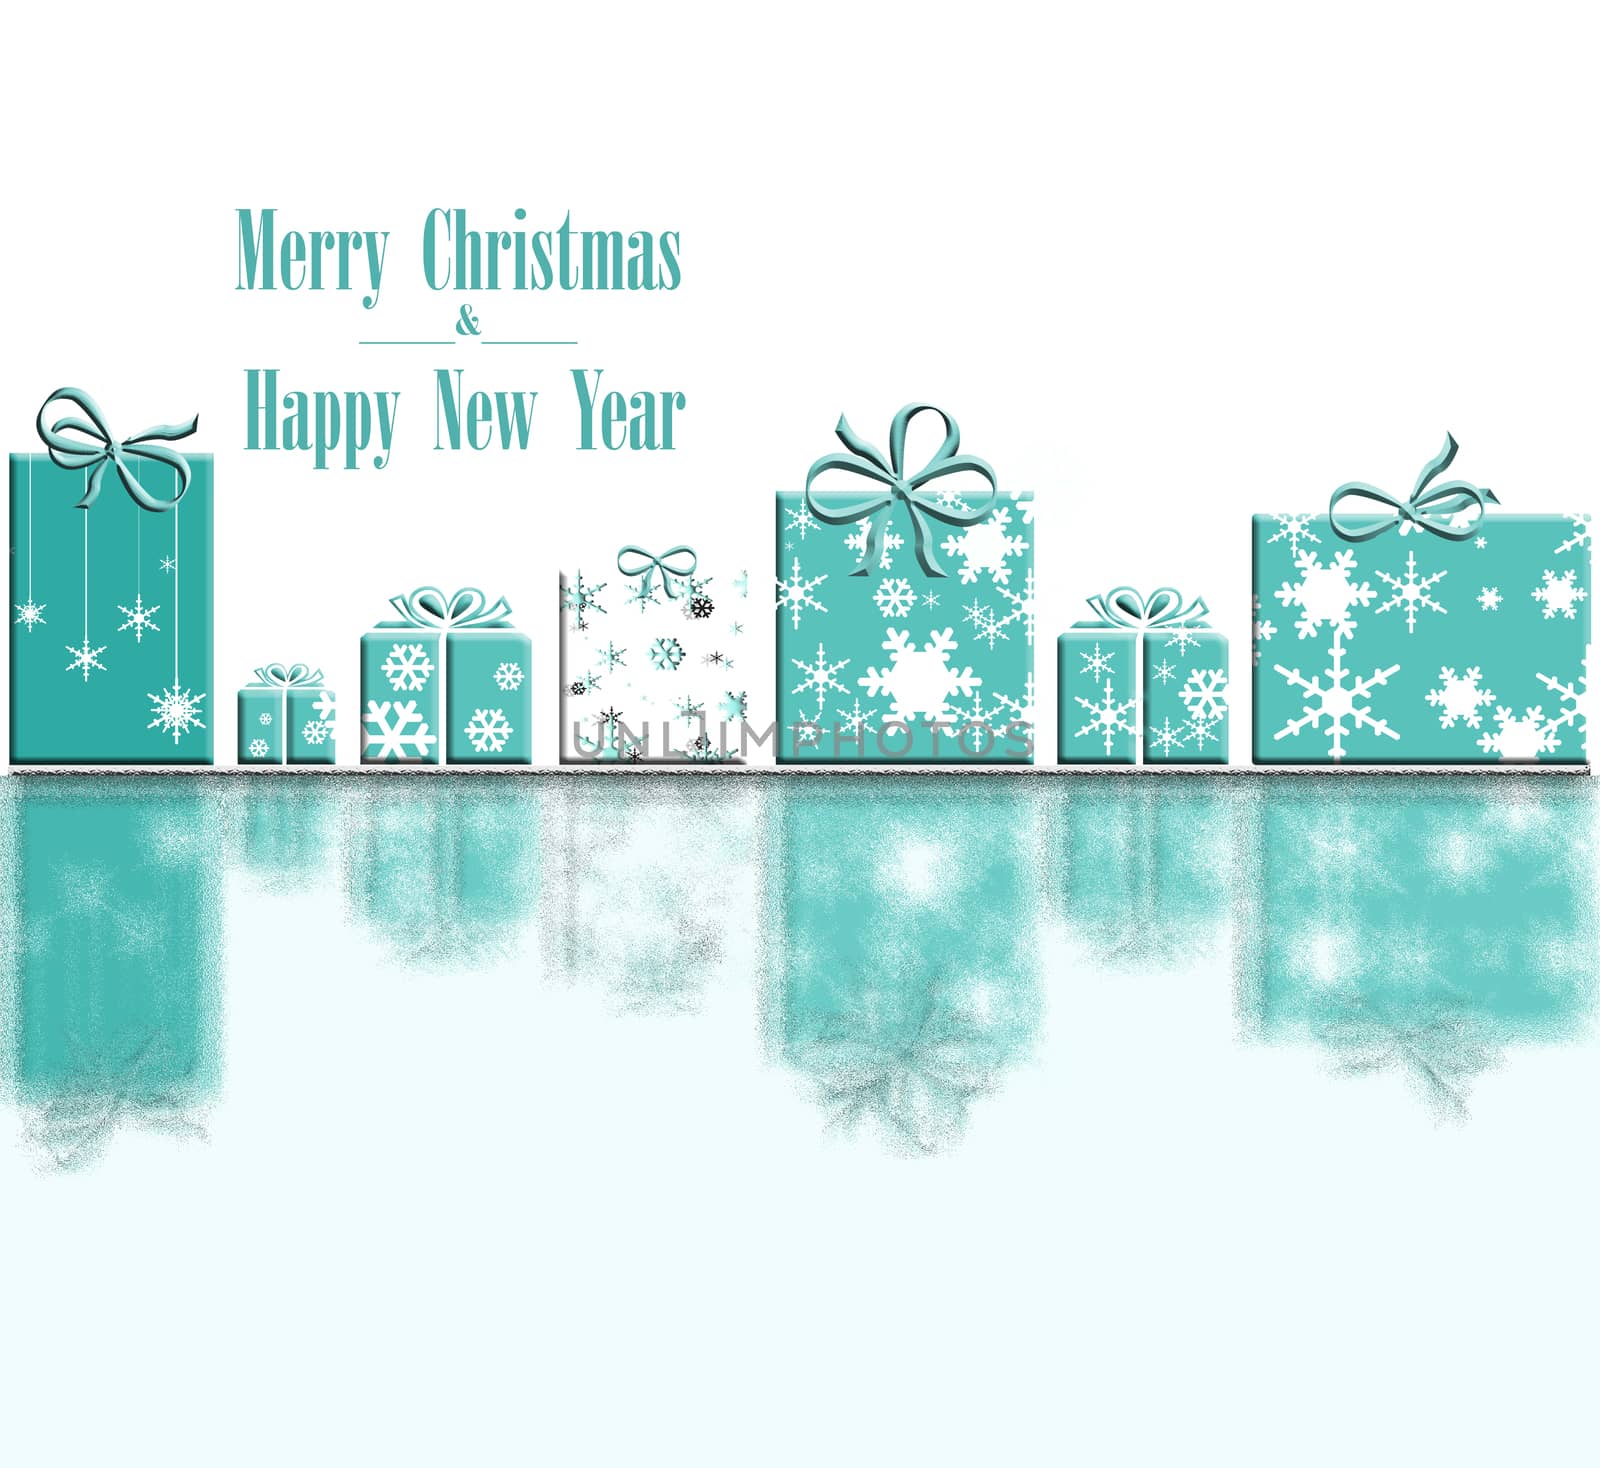 Luxury Christmas New Year greeting card concept. Tiffany blue words Merry Christmas and Happy New Year on white background with reflection. Abstract wrapped turquoise blue gift boxes. Illustration